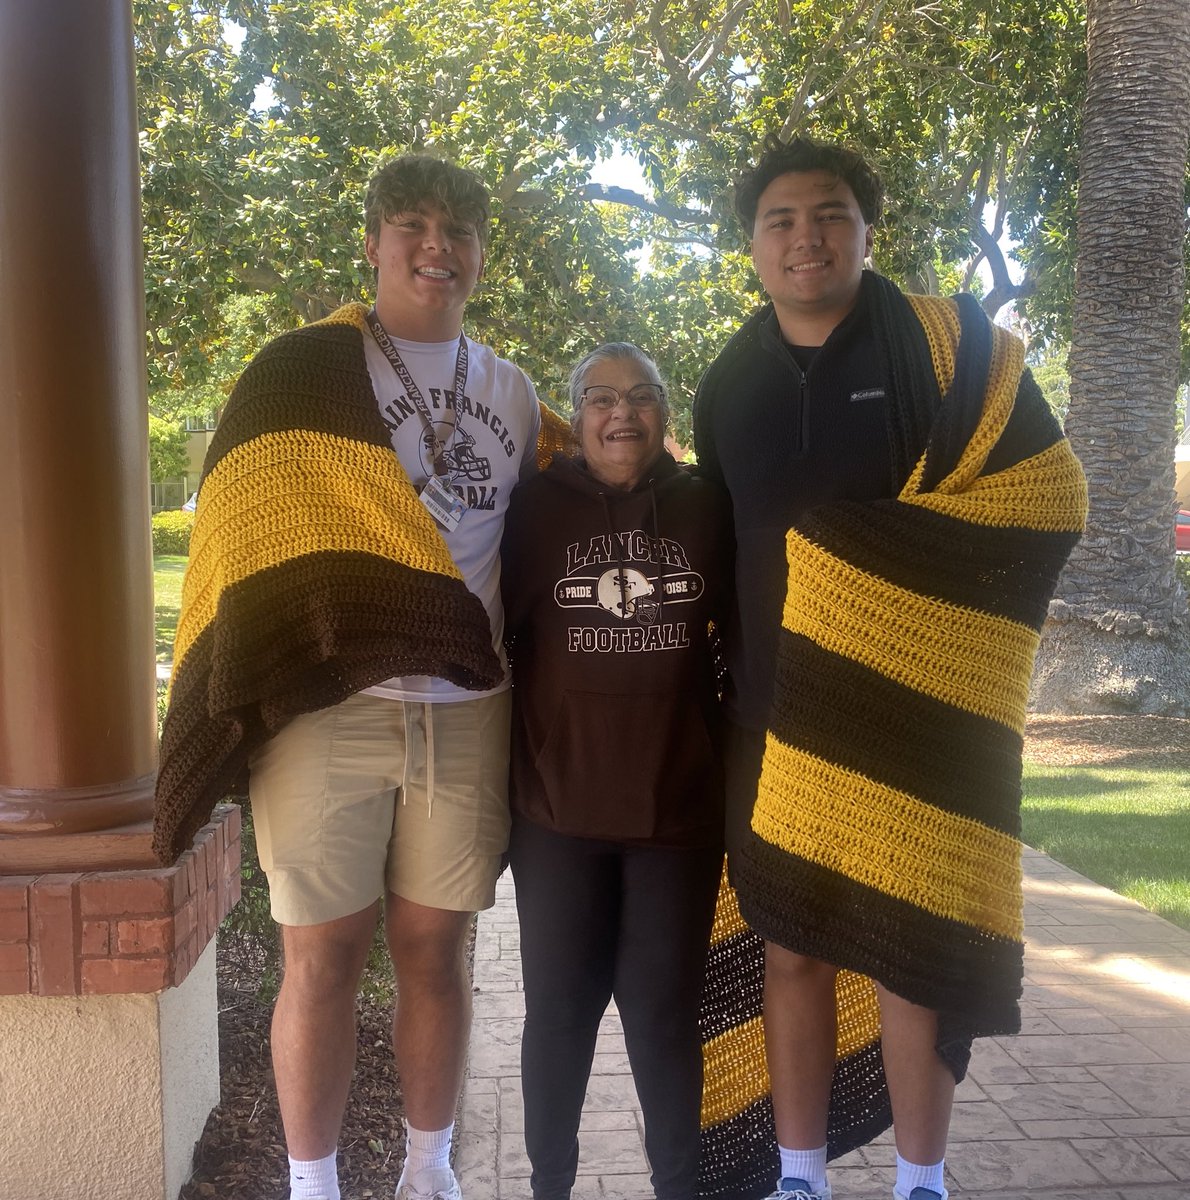 Coach Calcagno’s Mom brought her handmade “Noni” blankets up to campus today to our 2 seniors who have committed to play football at 4 year colleges next year. Congratulations Chris Quinonez (Idaho) and Asher Kolodziej (Valparaiso) #TraditionNeverGraduates